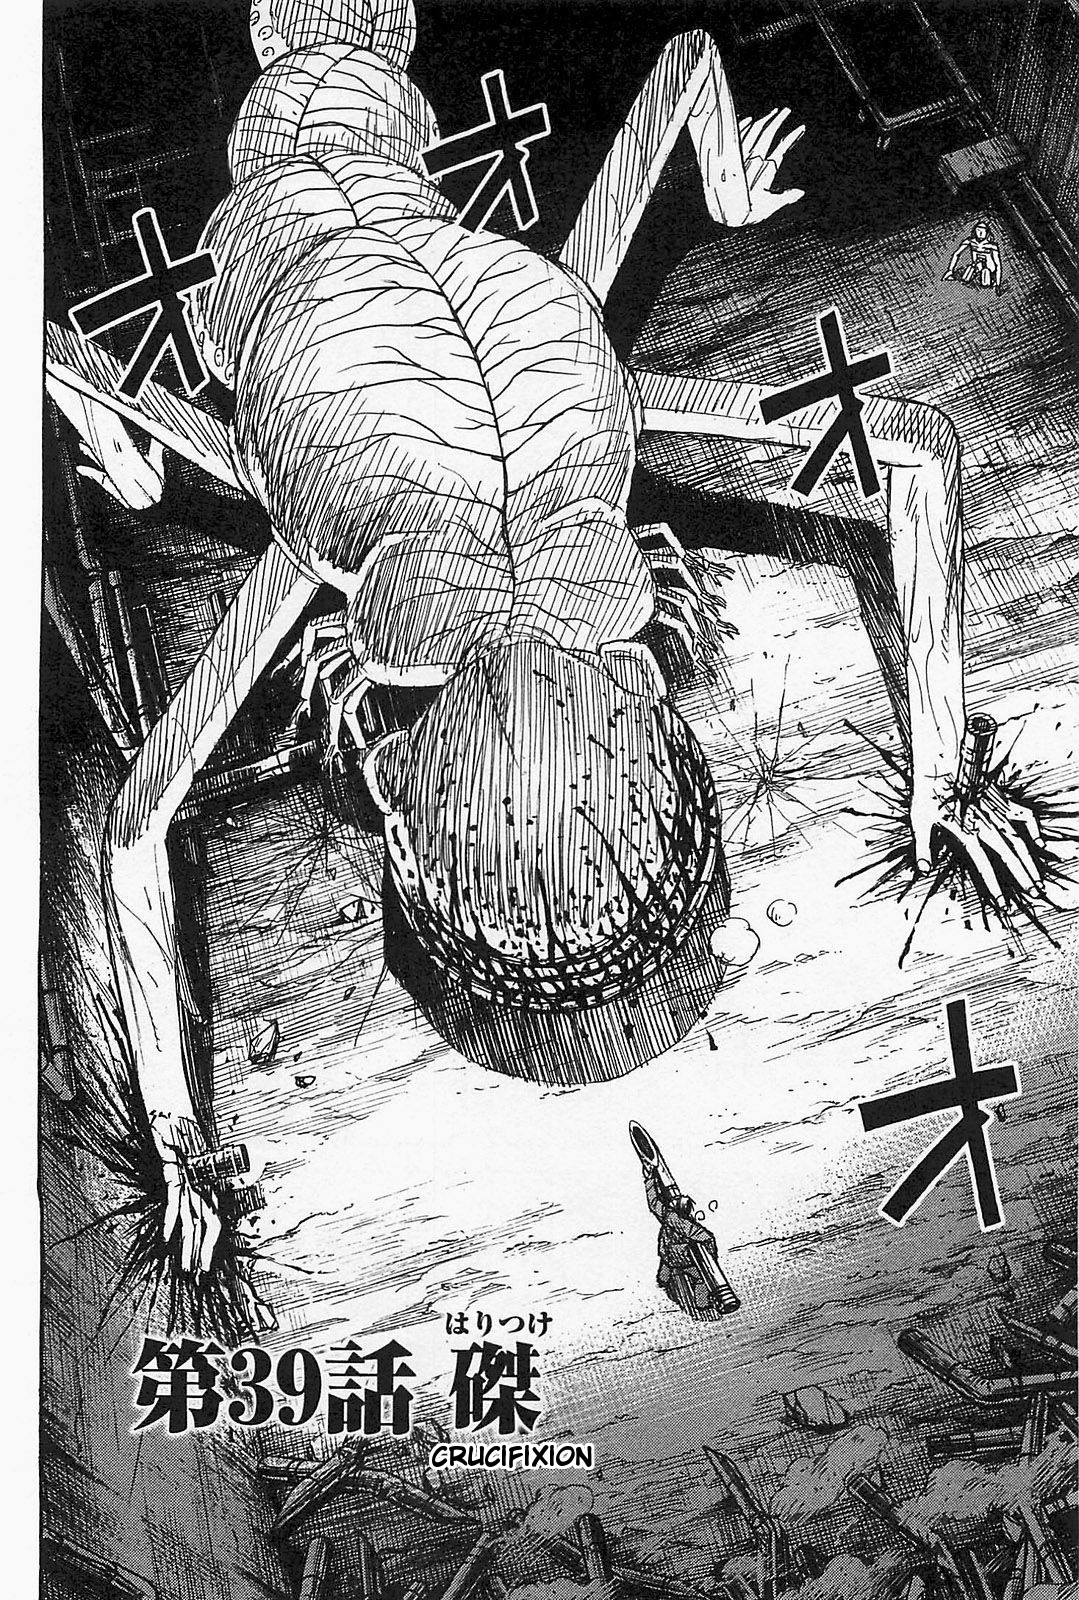 Higanjima - Last 47 Days Vol.4 Chapter 39: Crucifixion - Picture 2